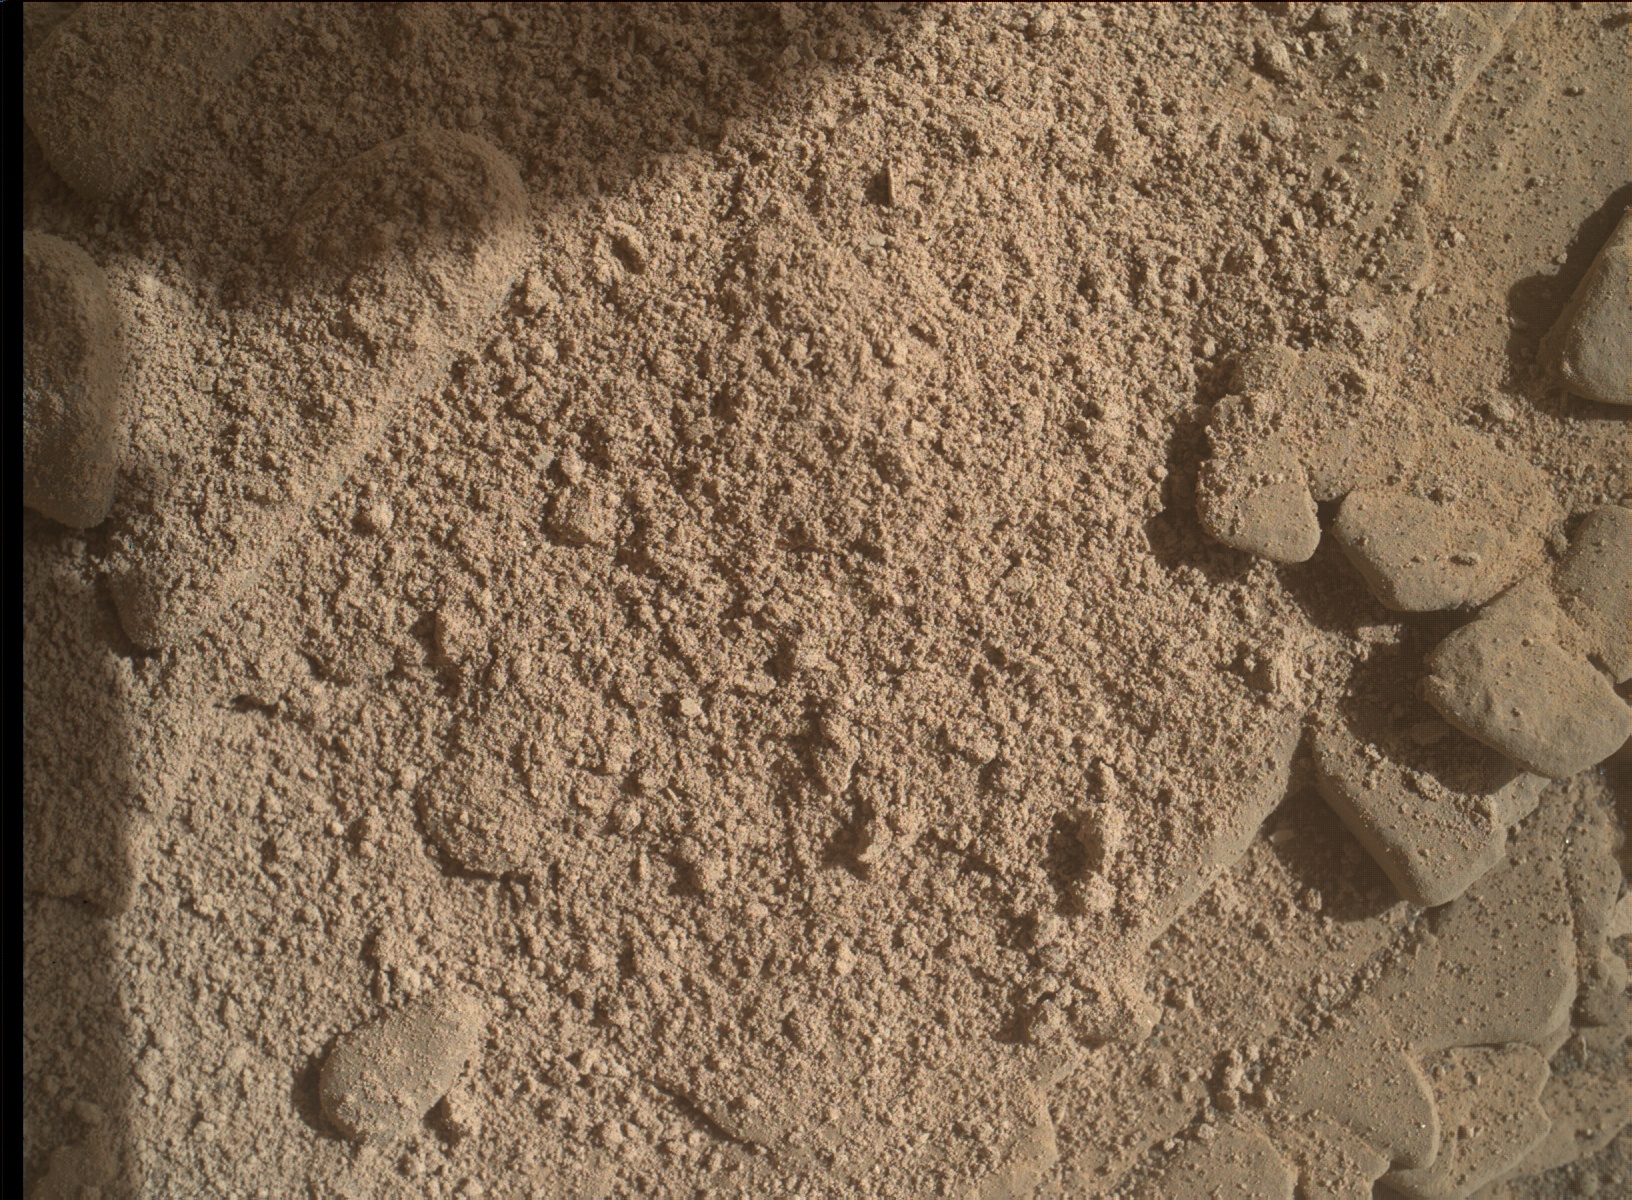 Nasa's Mars rover Curiosity acquired this image using its Mars Hand Lens Imager (MAHLI) on Sol 2552